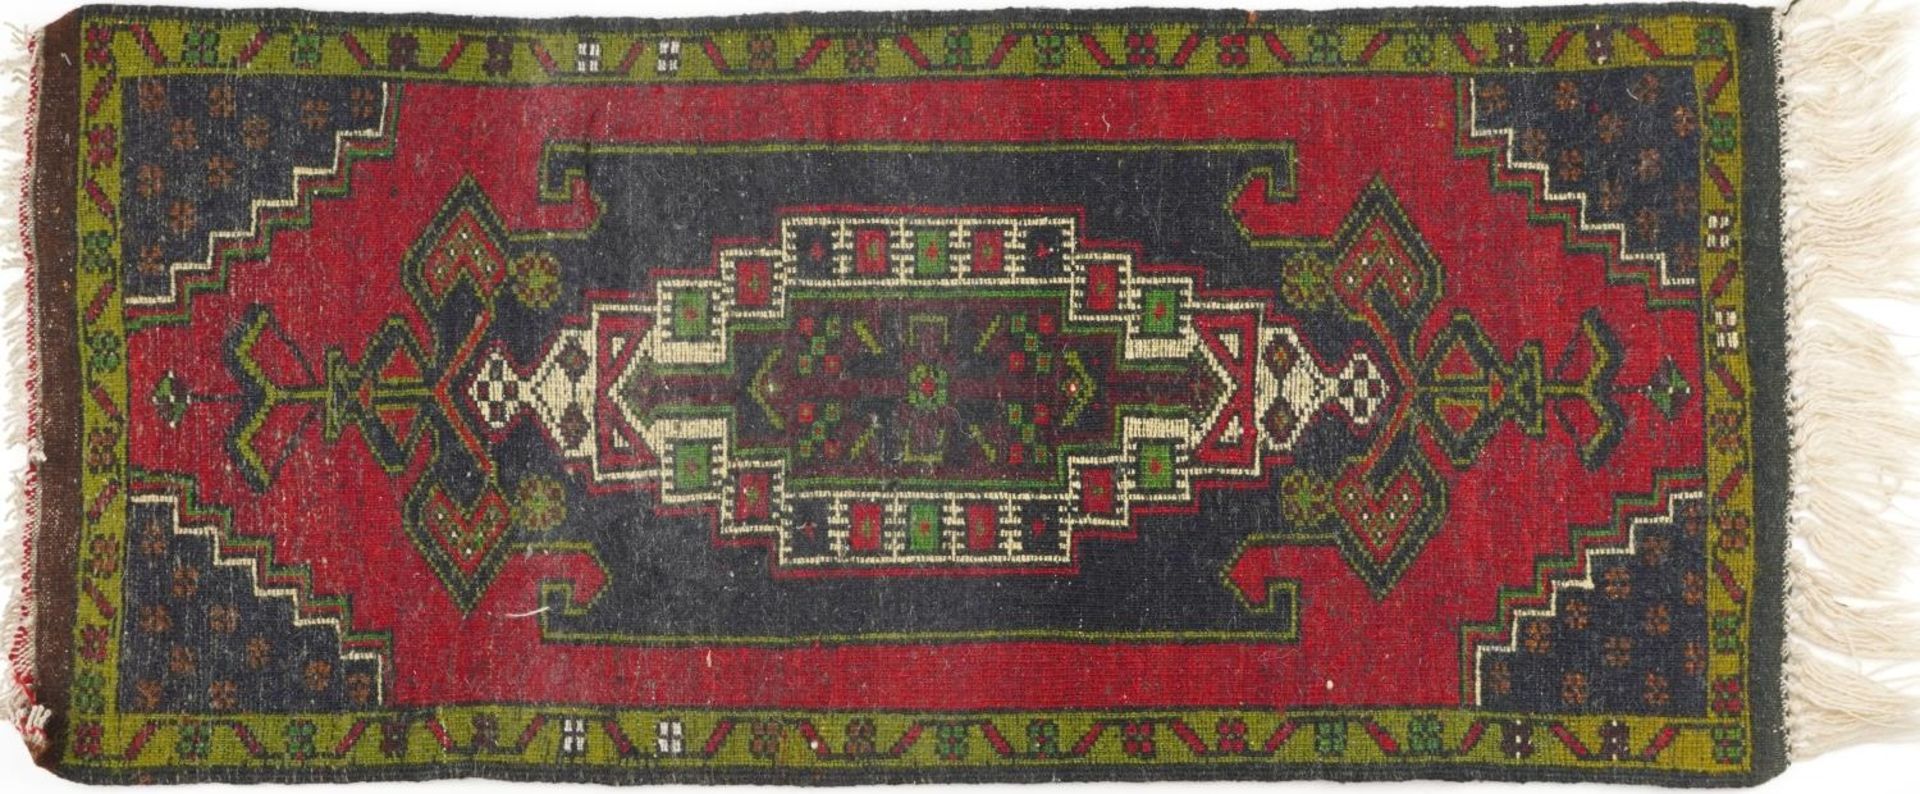 Rectangular Persian red and blue ground rug having an allover repeat floral design, 120cm x 53.5cm - Image 3 of 3